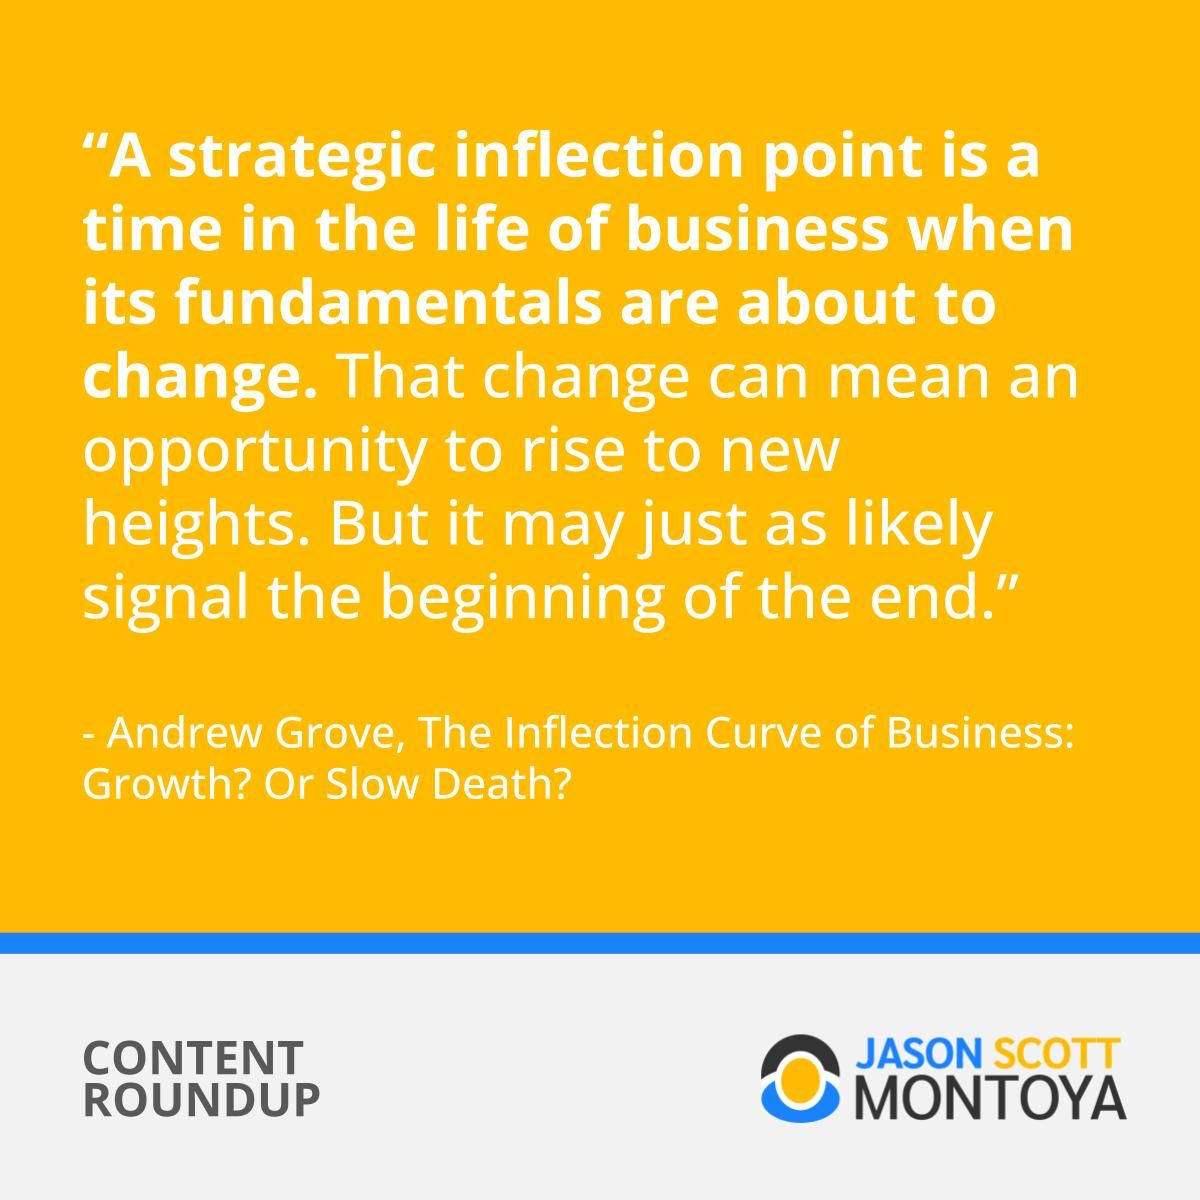 A strategic inflection point is a time in the life of business when its fundamentals are about to change. That change can mean an opportunity to rise to new heights. But it may just as likely signal the beginning of the end.” - Andrew Grove